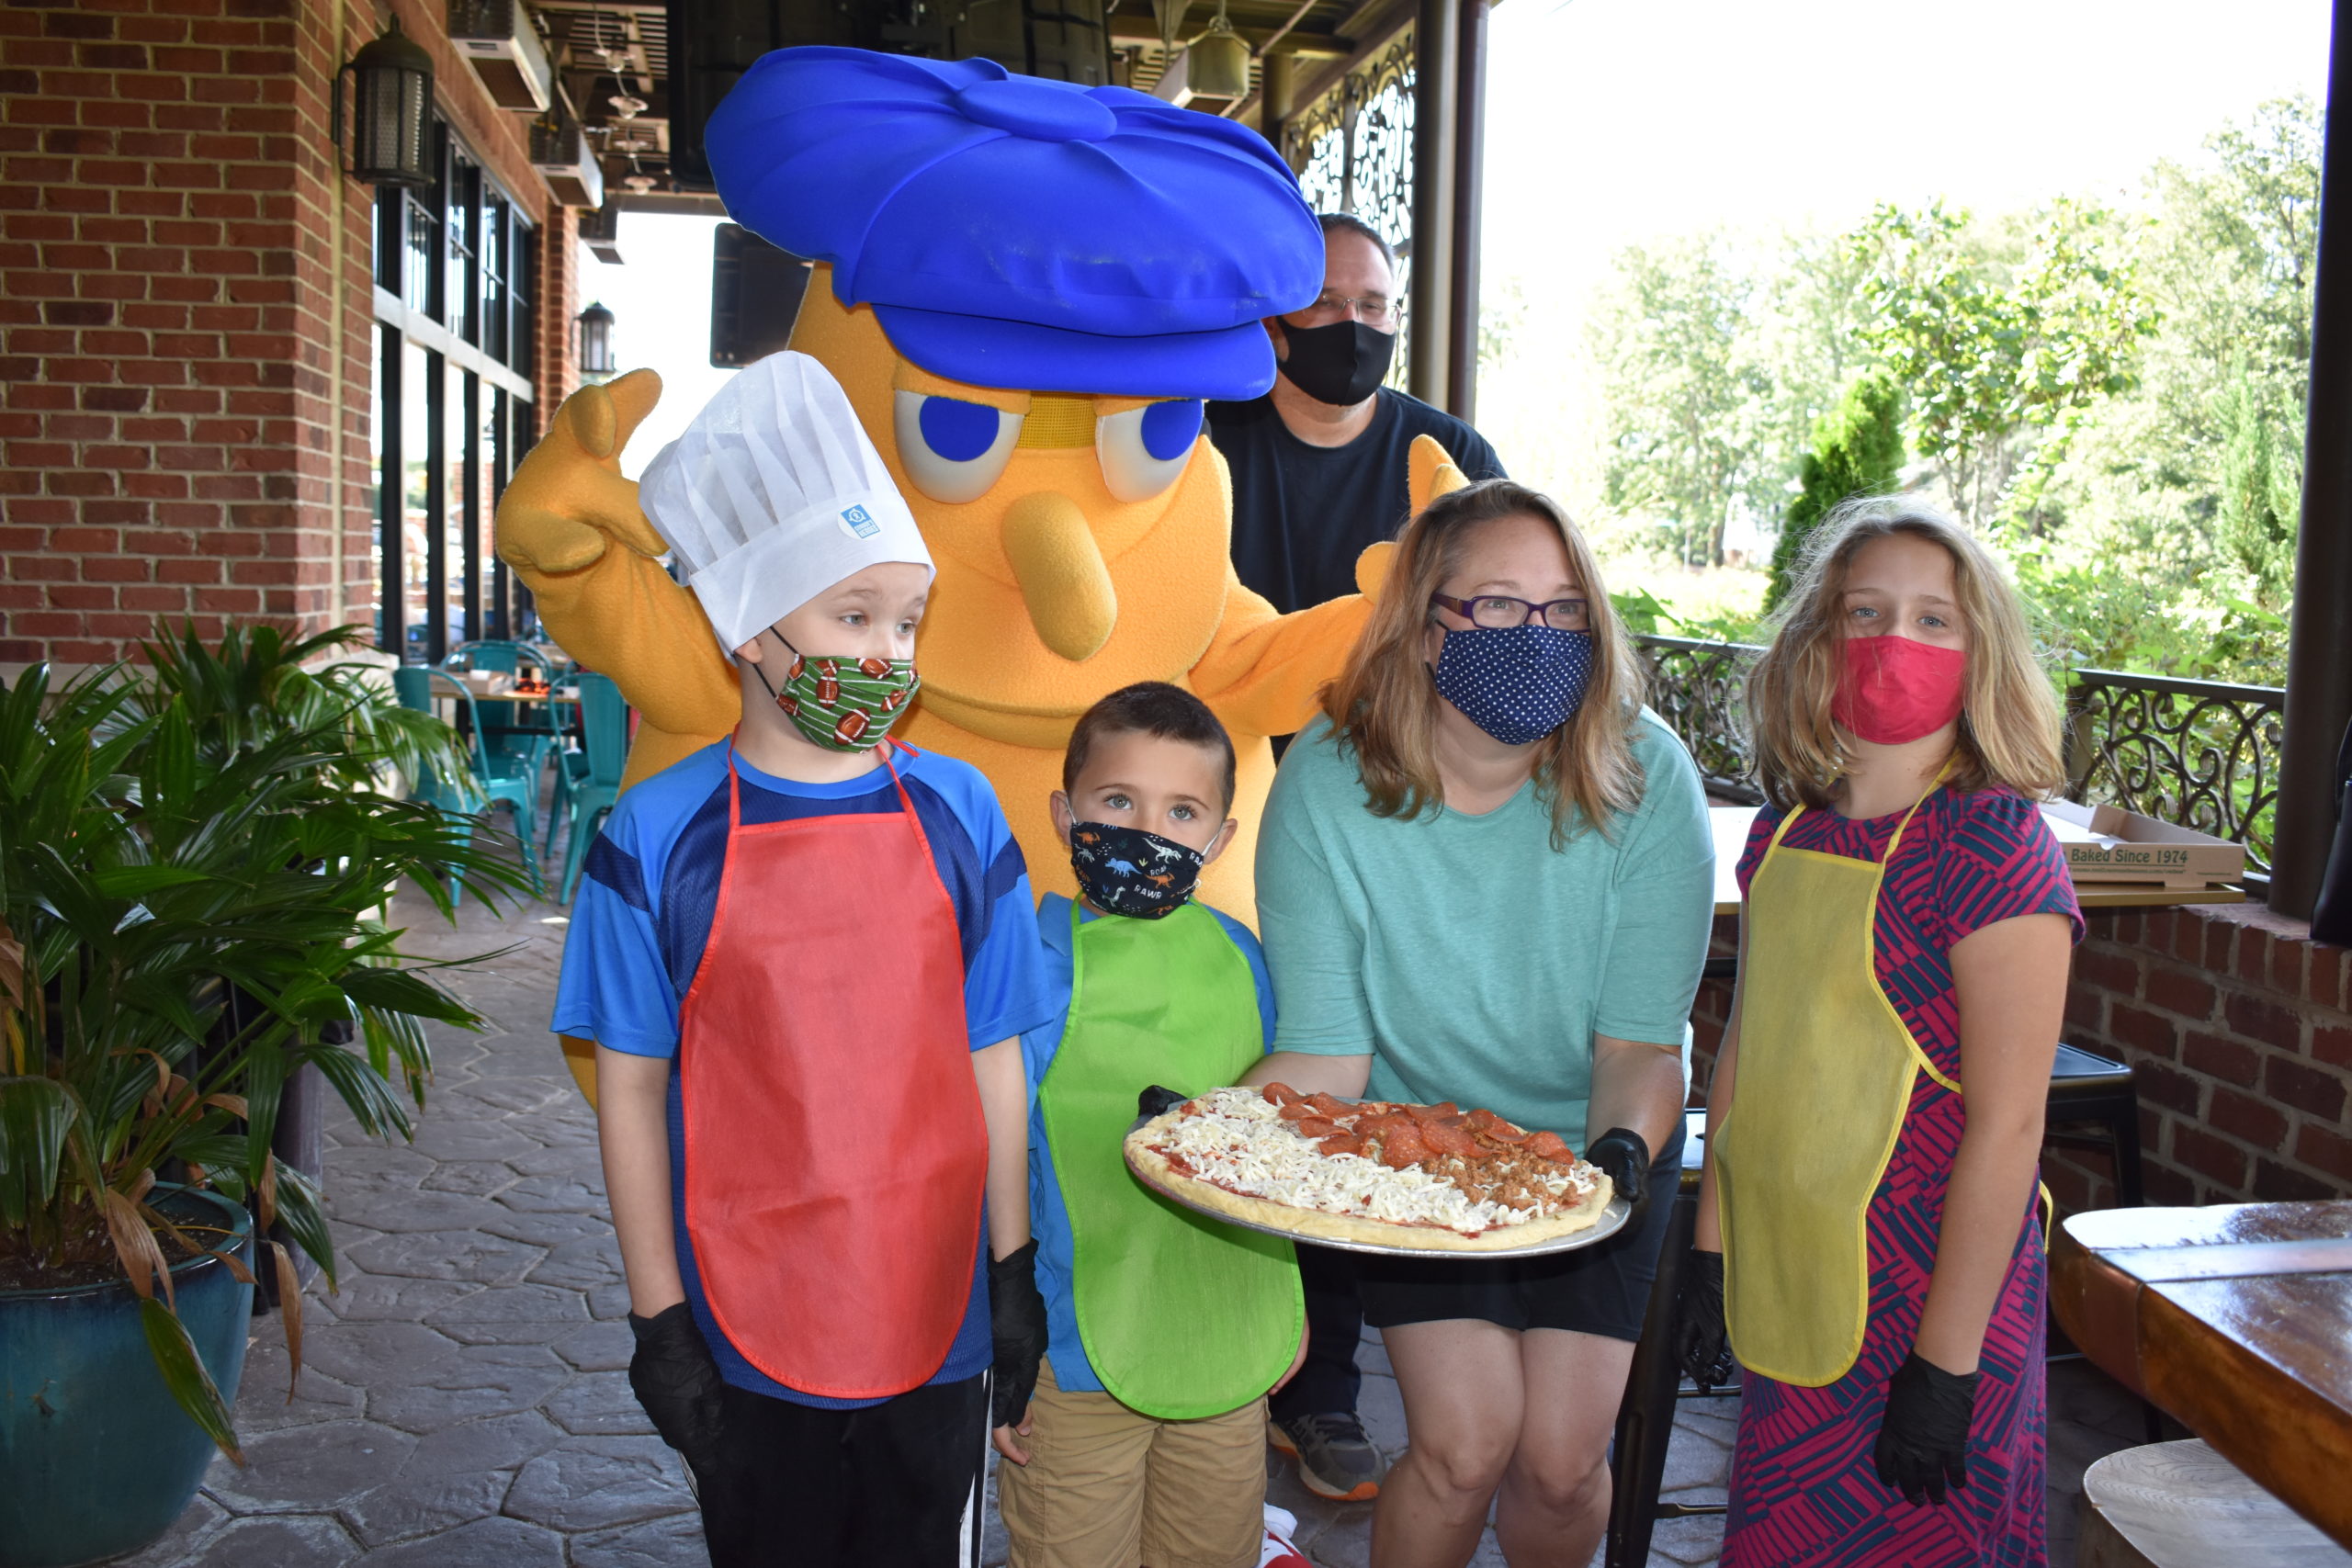 Image a family standing with a person wearing a mushroom costume and holding a pizza